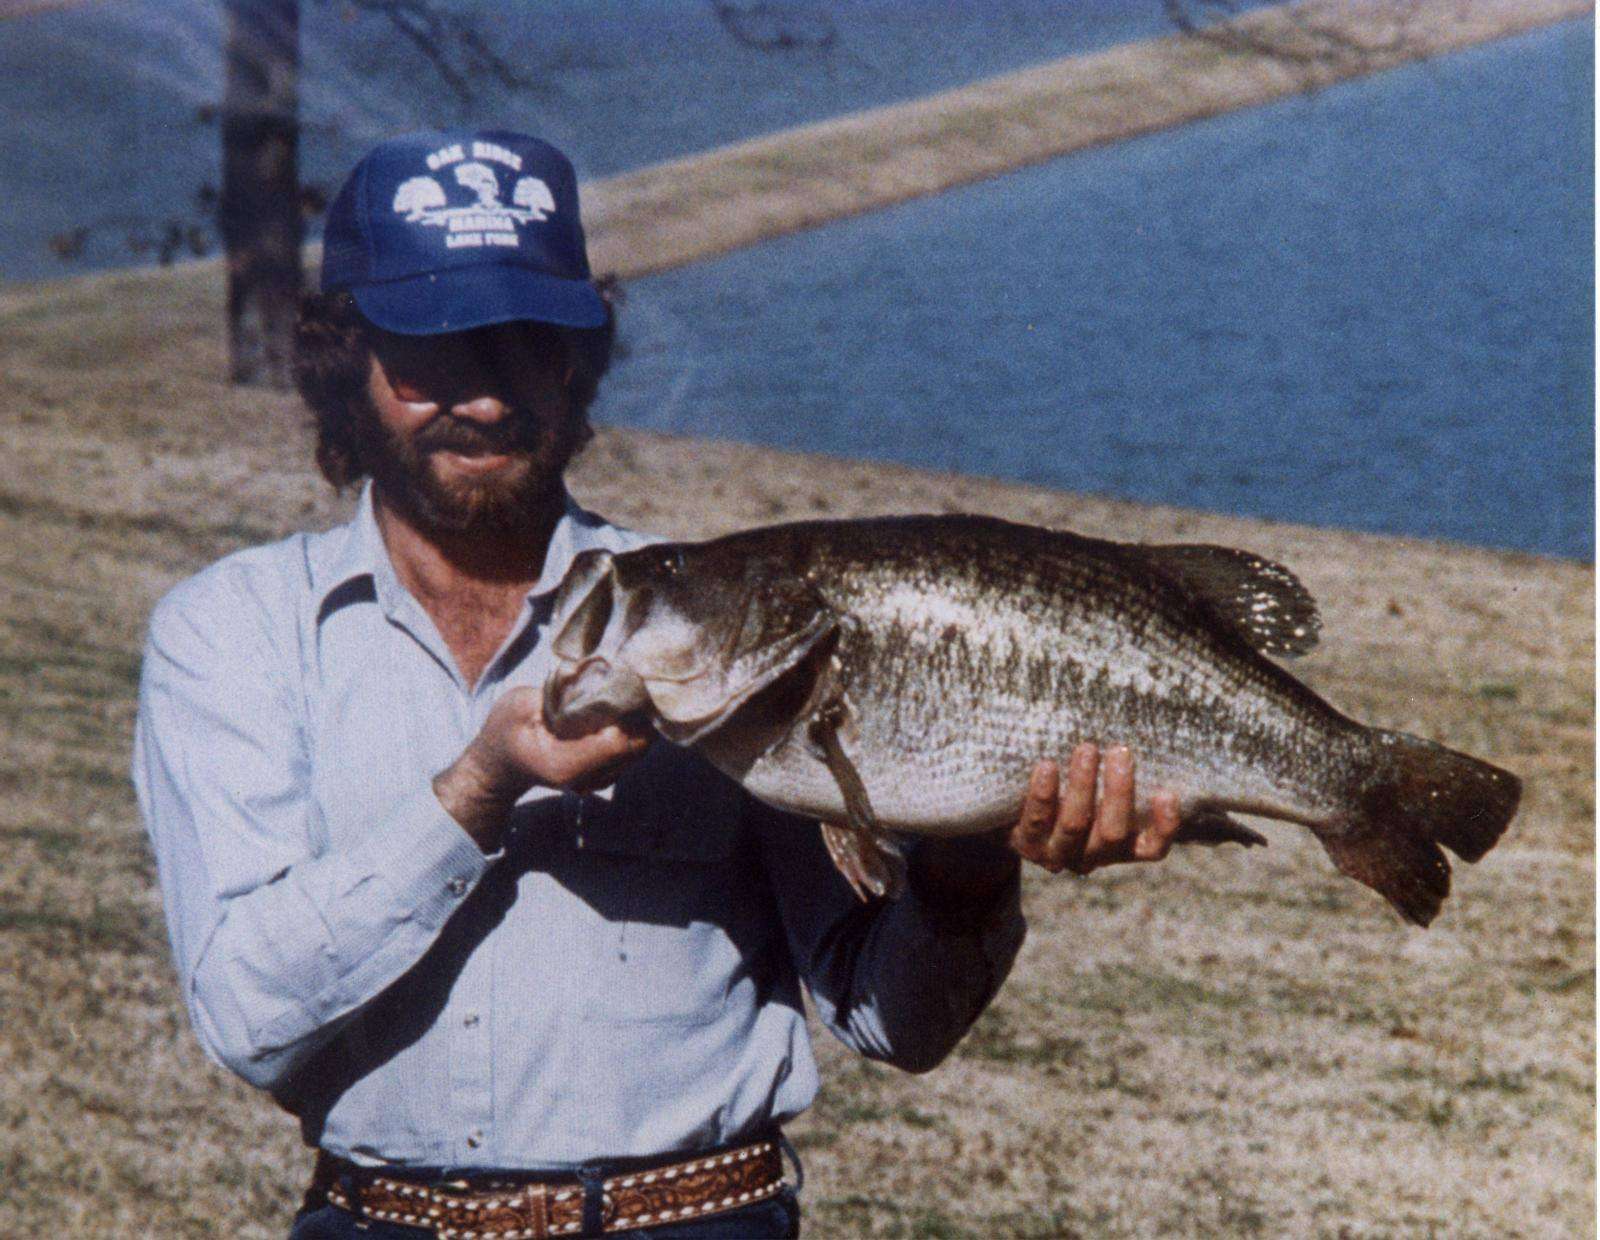 Lake Fork is a mecca for trophy bass. Big fish have long drawn anglers and put an economic value of the fishery at $38.4 million. Fork has produced 30 of the top 50 ShareLunker bass in the state. Barry St. Clairâs 18.18 from Fork in 1992 is the state record.